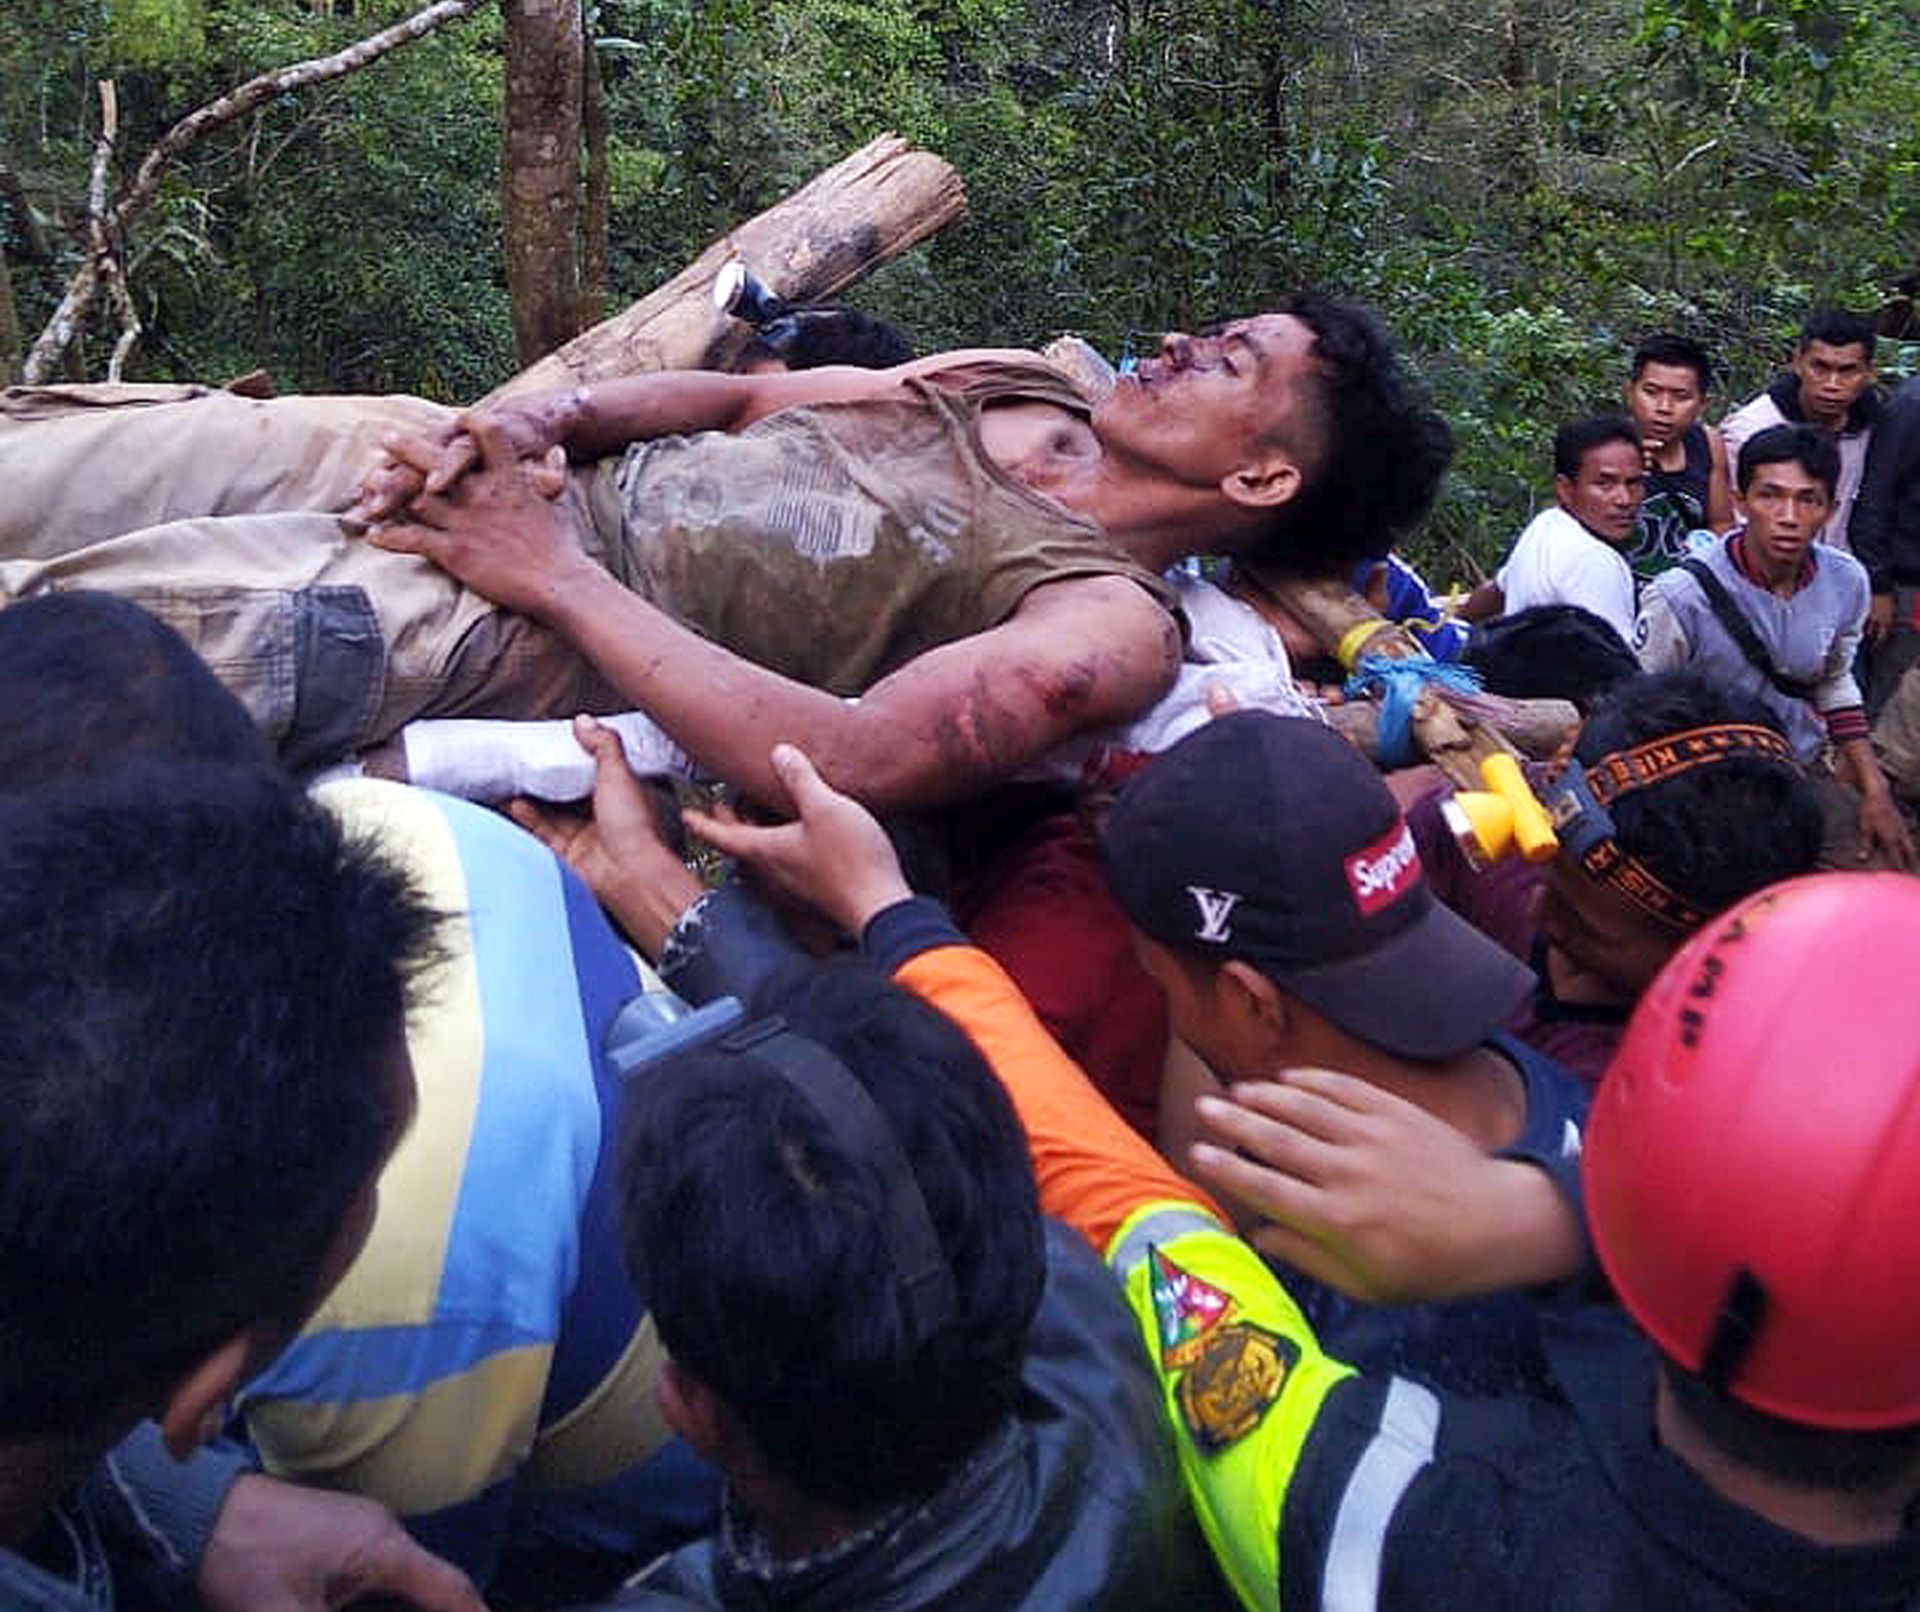 epa07400225 A handout photo made available by Indonesia's search and rescue (BASARNAS) shows rescuers carrying a survivor from a collapsed illegal gold mine in the Bolaang Mongondow region of North Sulawesi, Indonesia, 27 February 2019. A miner died and 60 more are missing in Indonesia after an illegal gold collapsed on the island of Celebes, official sources said. Thirteen other injured people could be rescued at the mine, according to Sutopo Purwo Nugroho, a spokesman for the National Disaster Management Agency.  EPA/BASARNAS MANADO HANDOUT BEST QUALITY AVAILABLE HANDOUT EDITORIAL USE ONLY/NO SALES